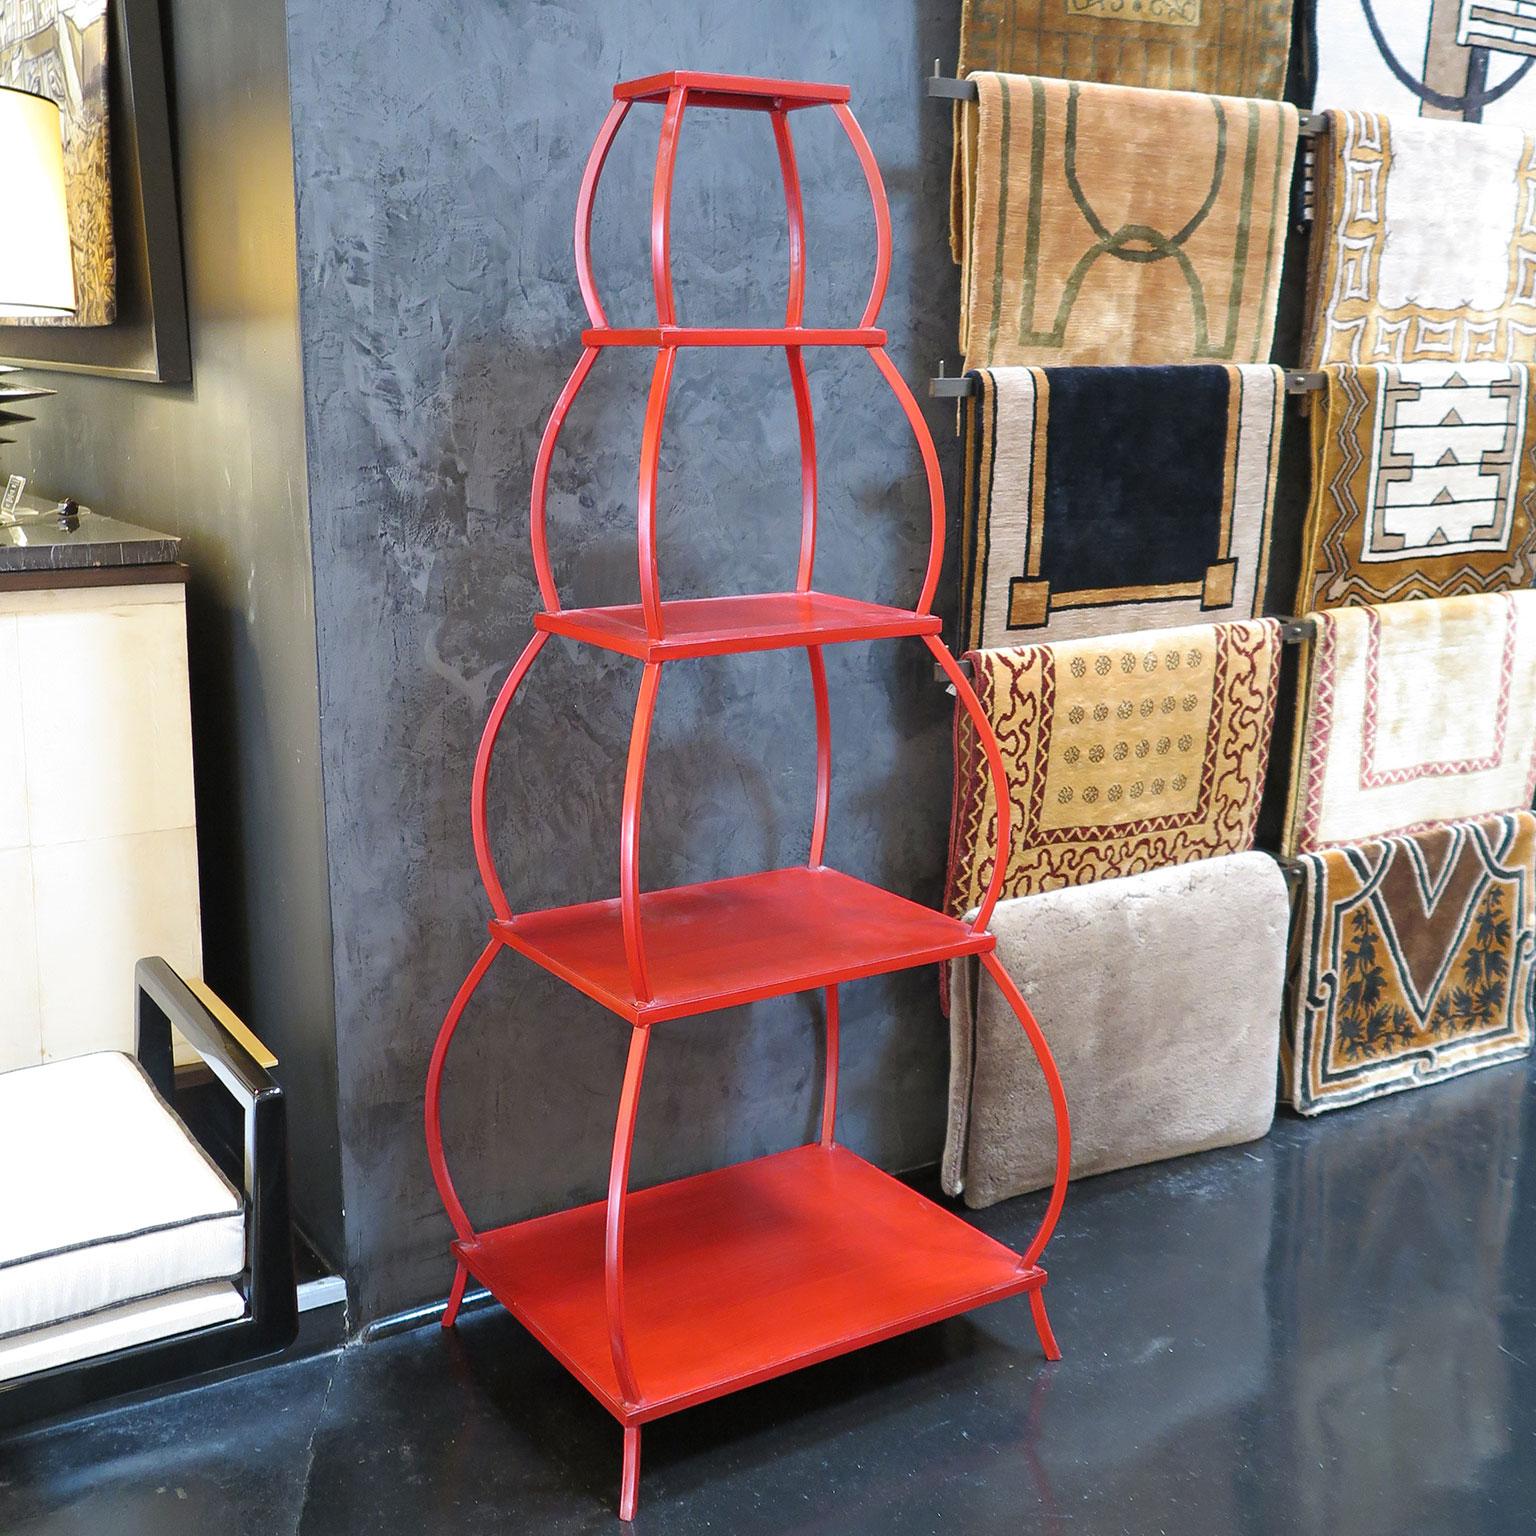 Vintage metal étagères in aged Chinese red lacquer in the style of a pagoda. Five tapered tiers with scalloped outer frame.